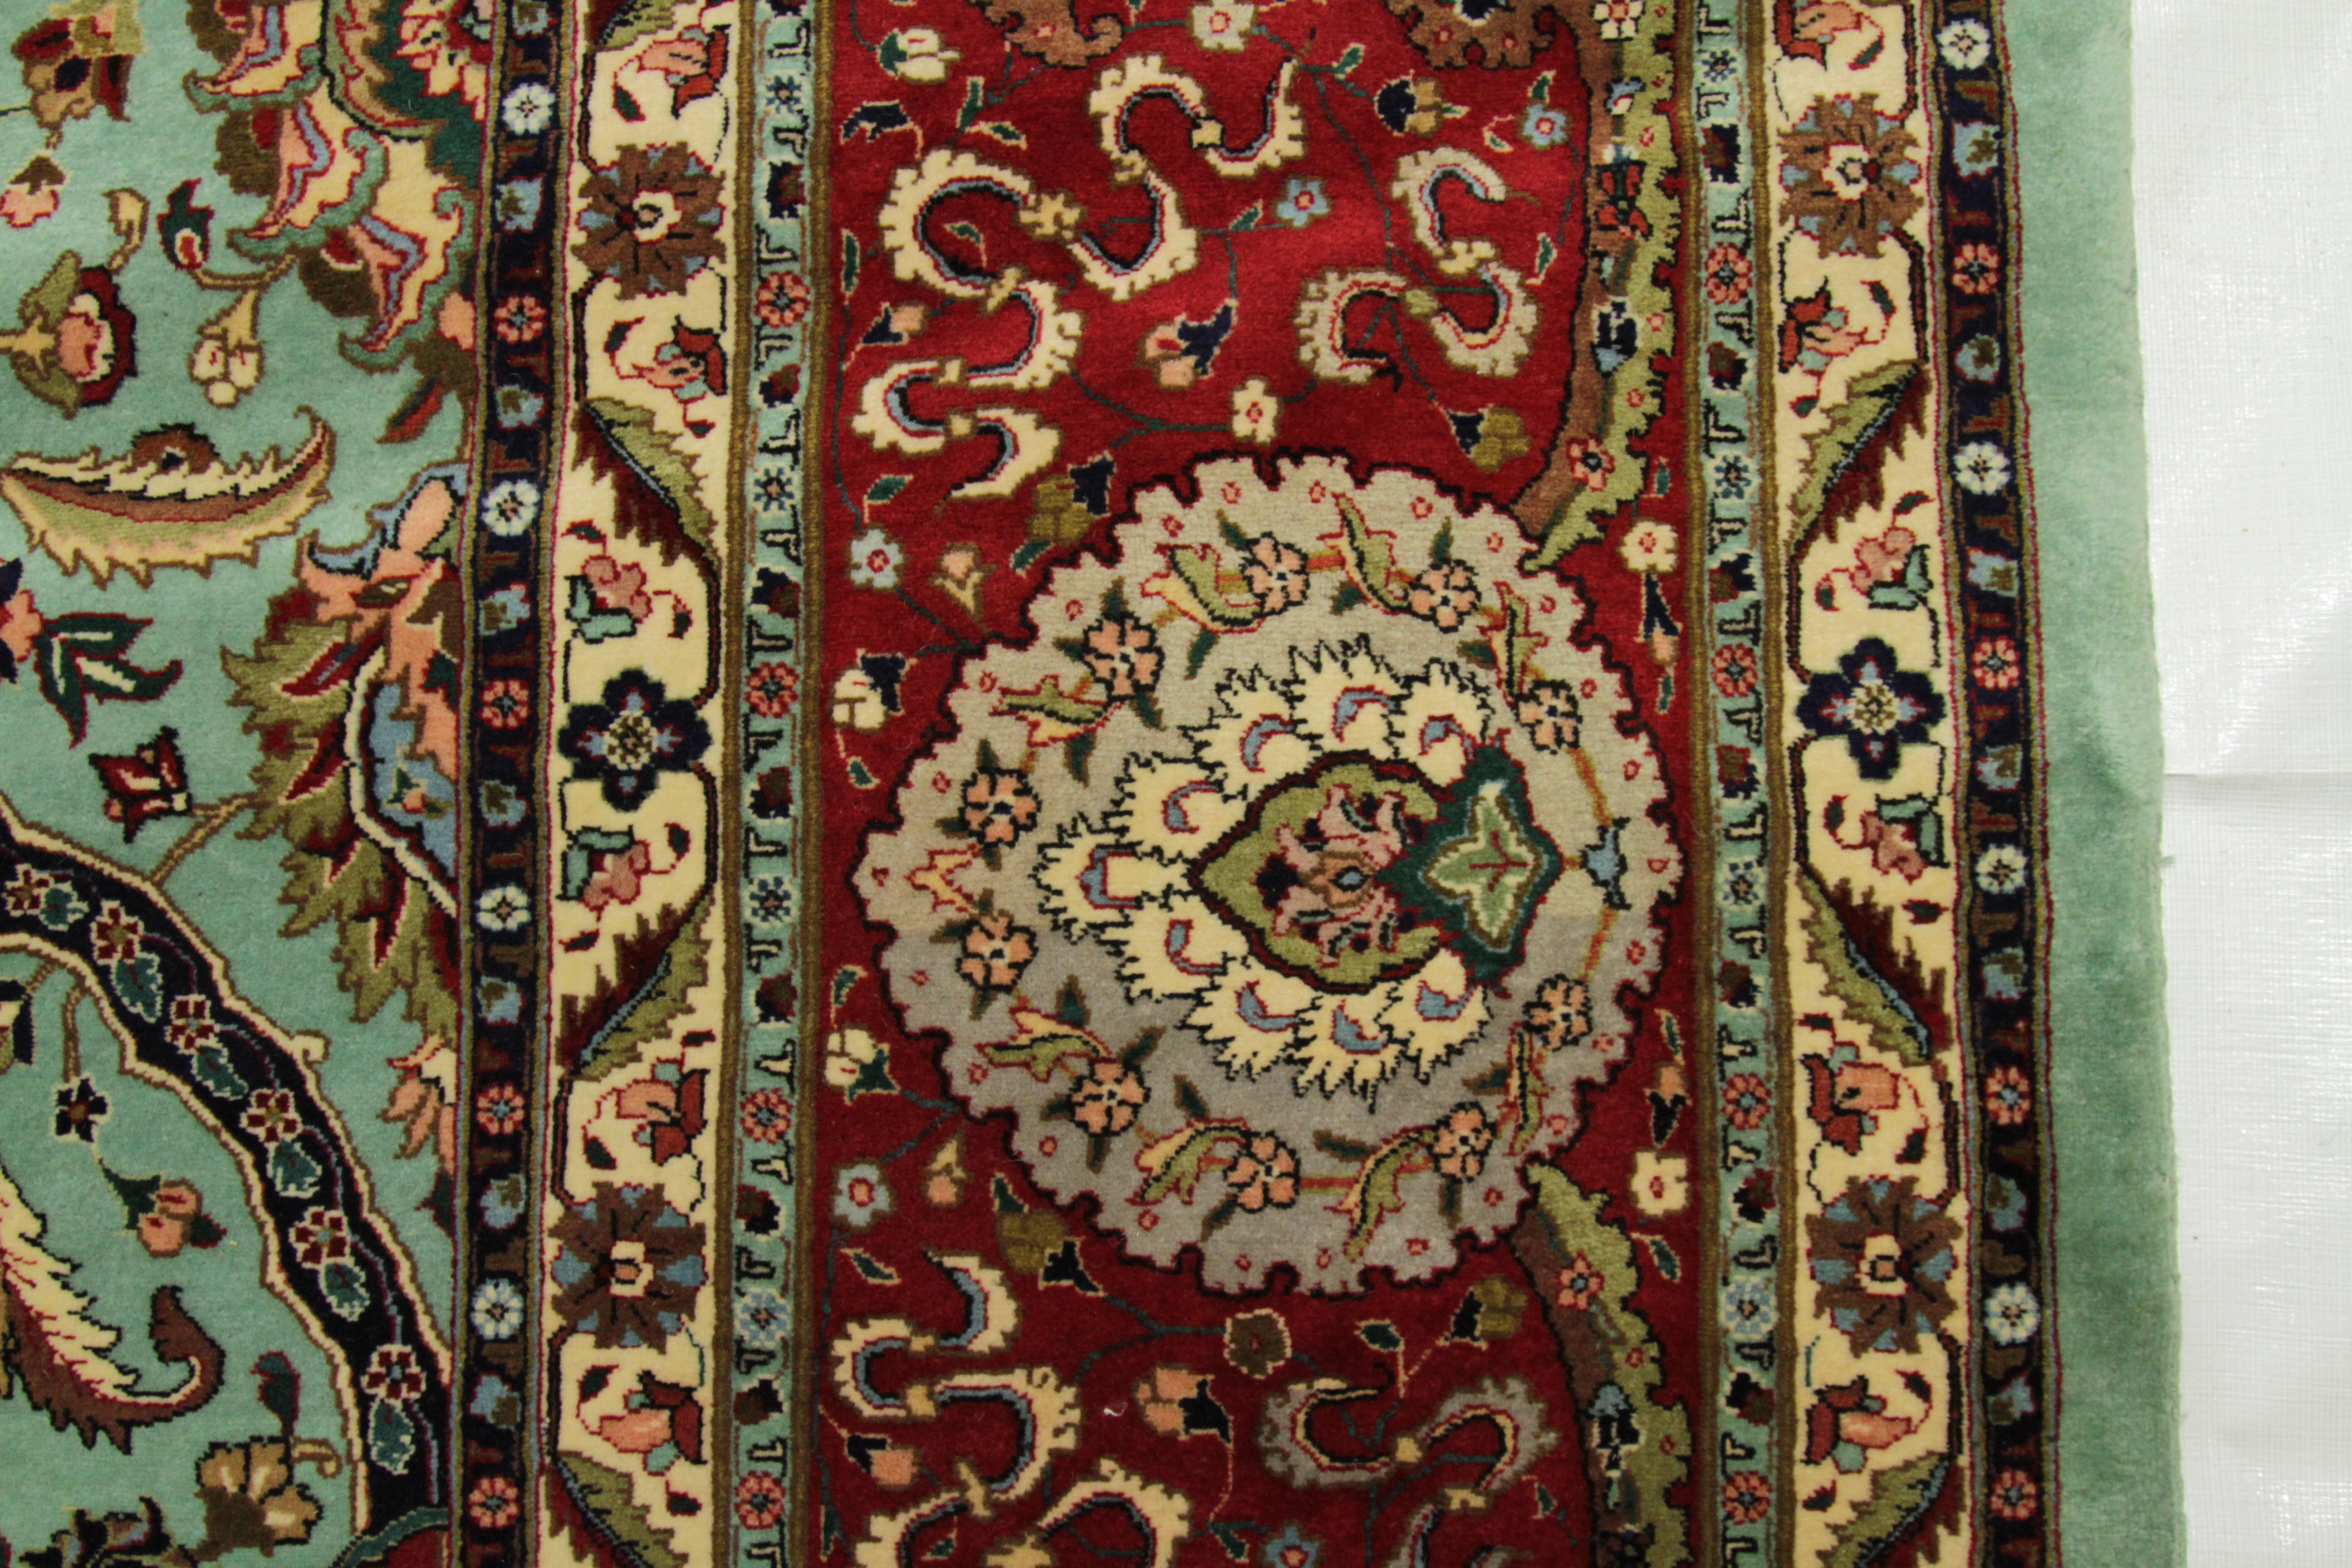 1970s Antique Tabriz Persian Rug with a Grand Blue and Red Floral Design For Sale 2